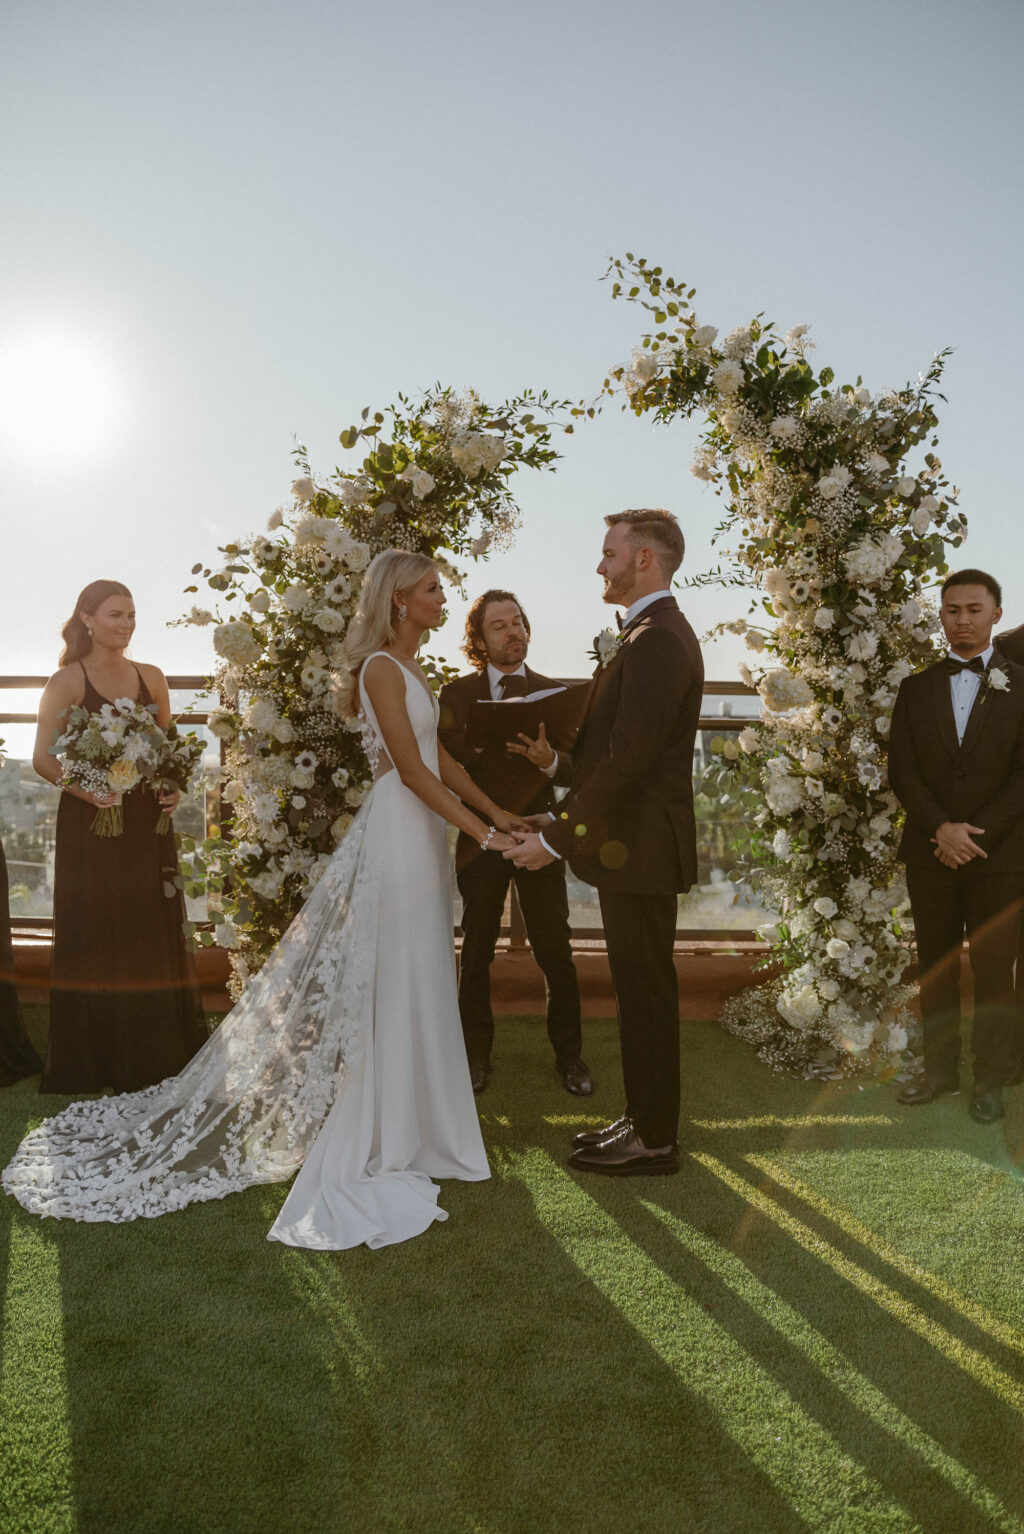 Bride and Groom Exchange Vows | Split Ceremony Arch White Floral and Greenery Ideas | St. Pete Beach Rooftop Venue Wedding Hotel Zamora | Florist Lemon Drops Wedding & Events